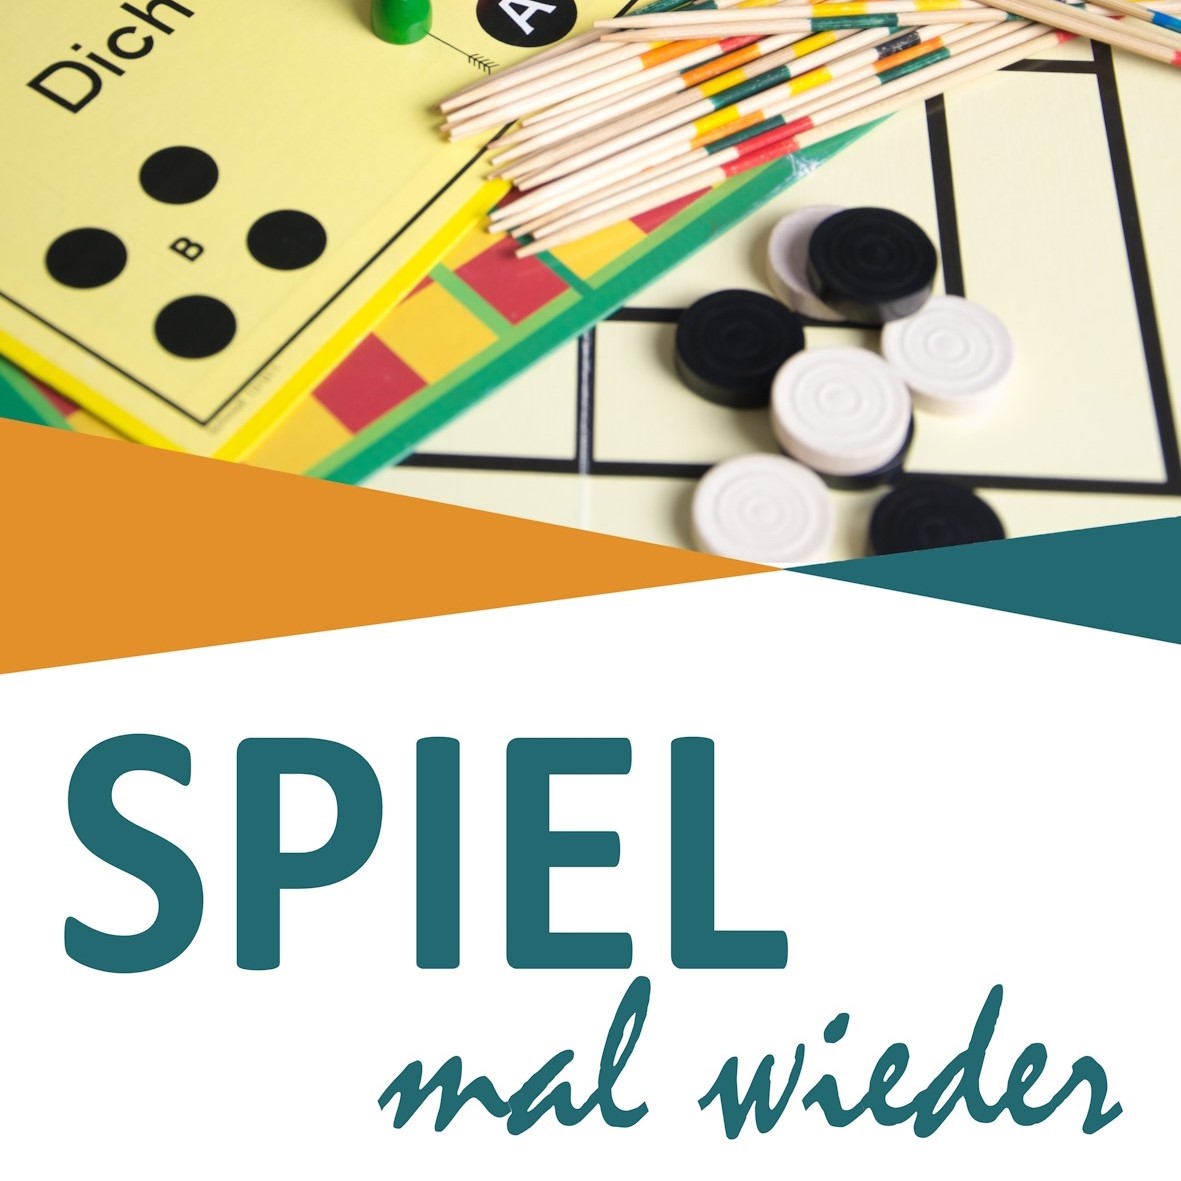 You are currently viewing Spielenachmittag